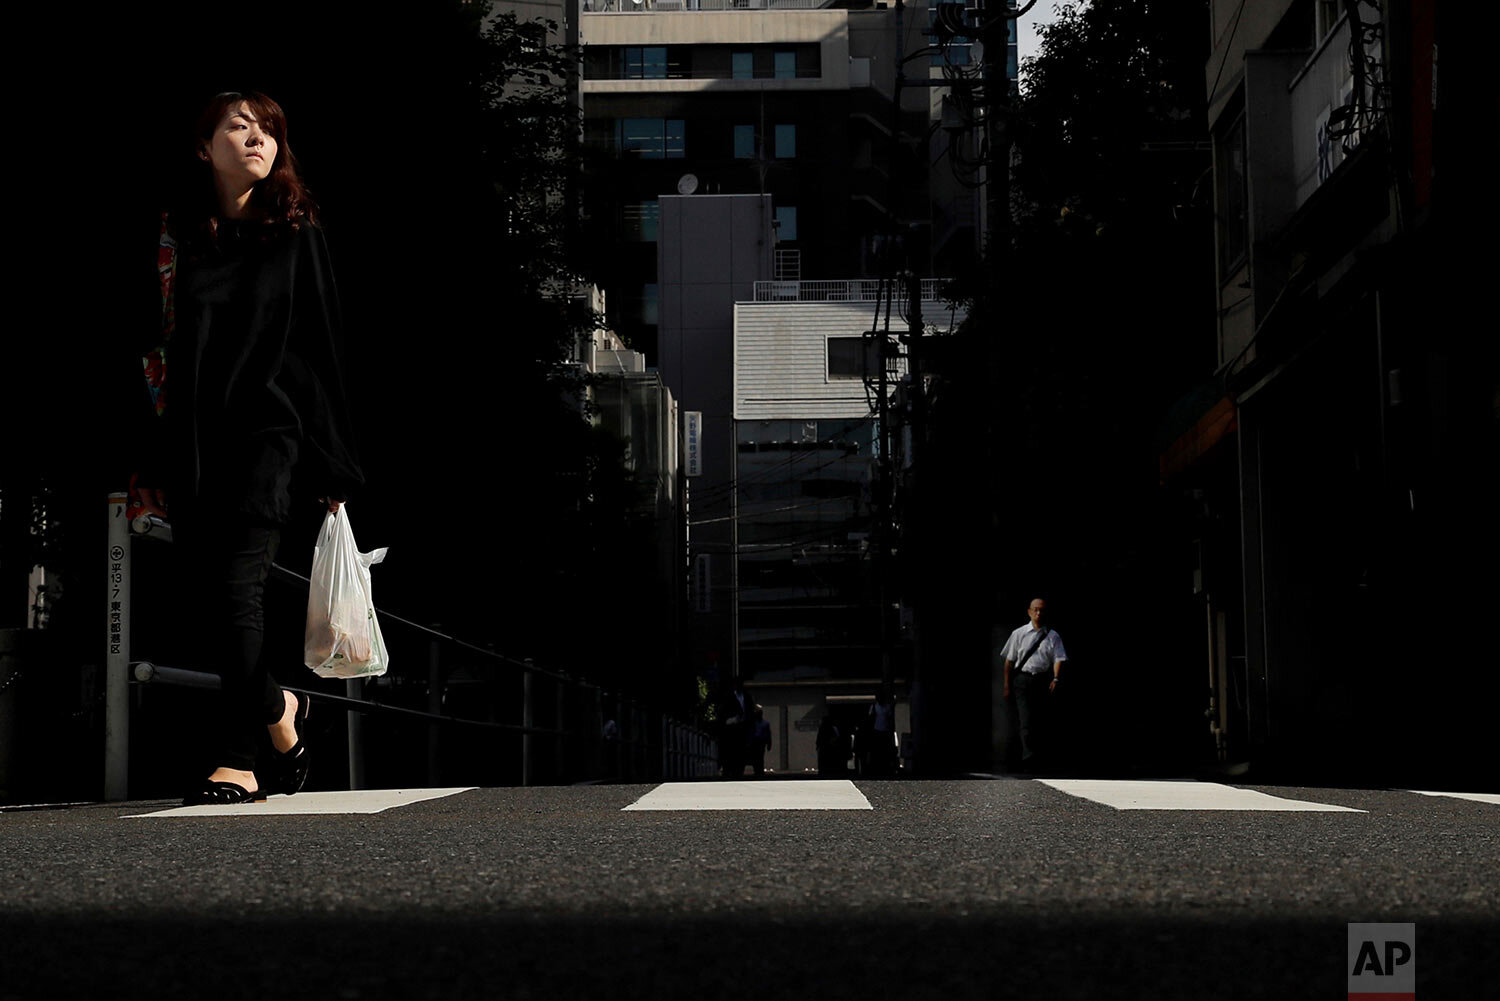  A woman crosses the street in the Shinbashi district of Tokyo, Japan, Friday, Sept. 20, 2019. (AP Photo/Christophe Ena) 